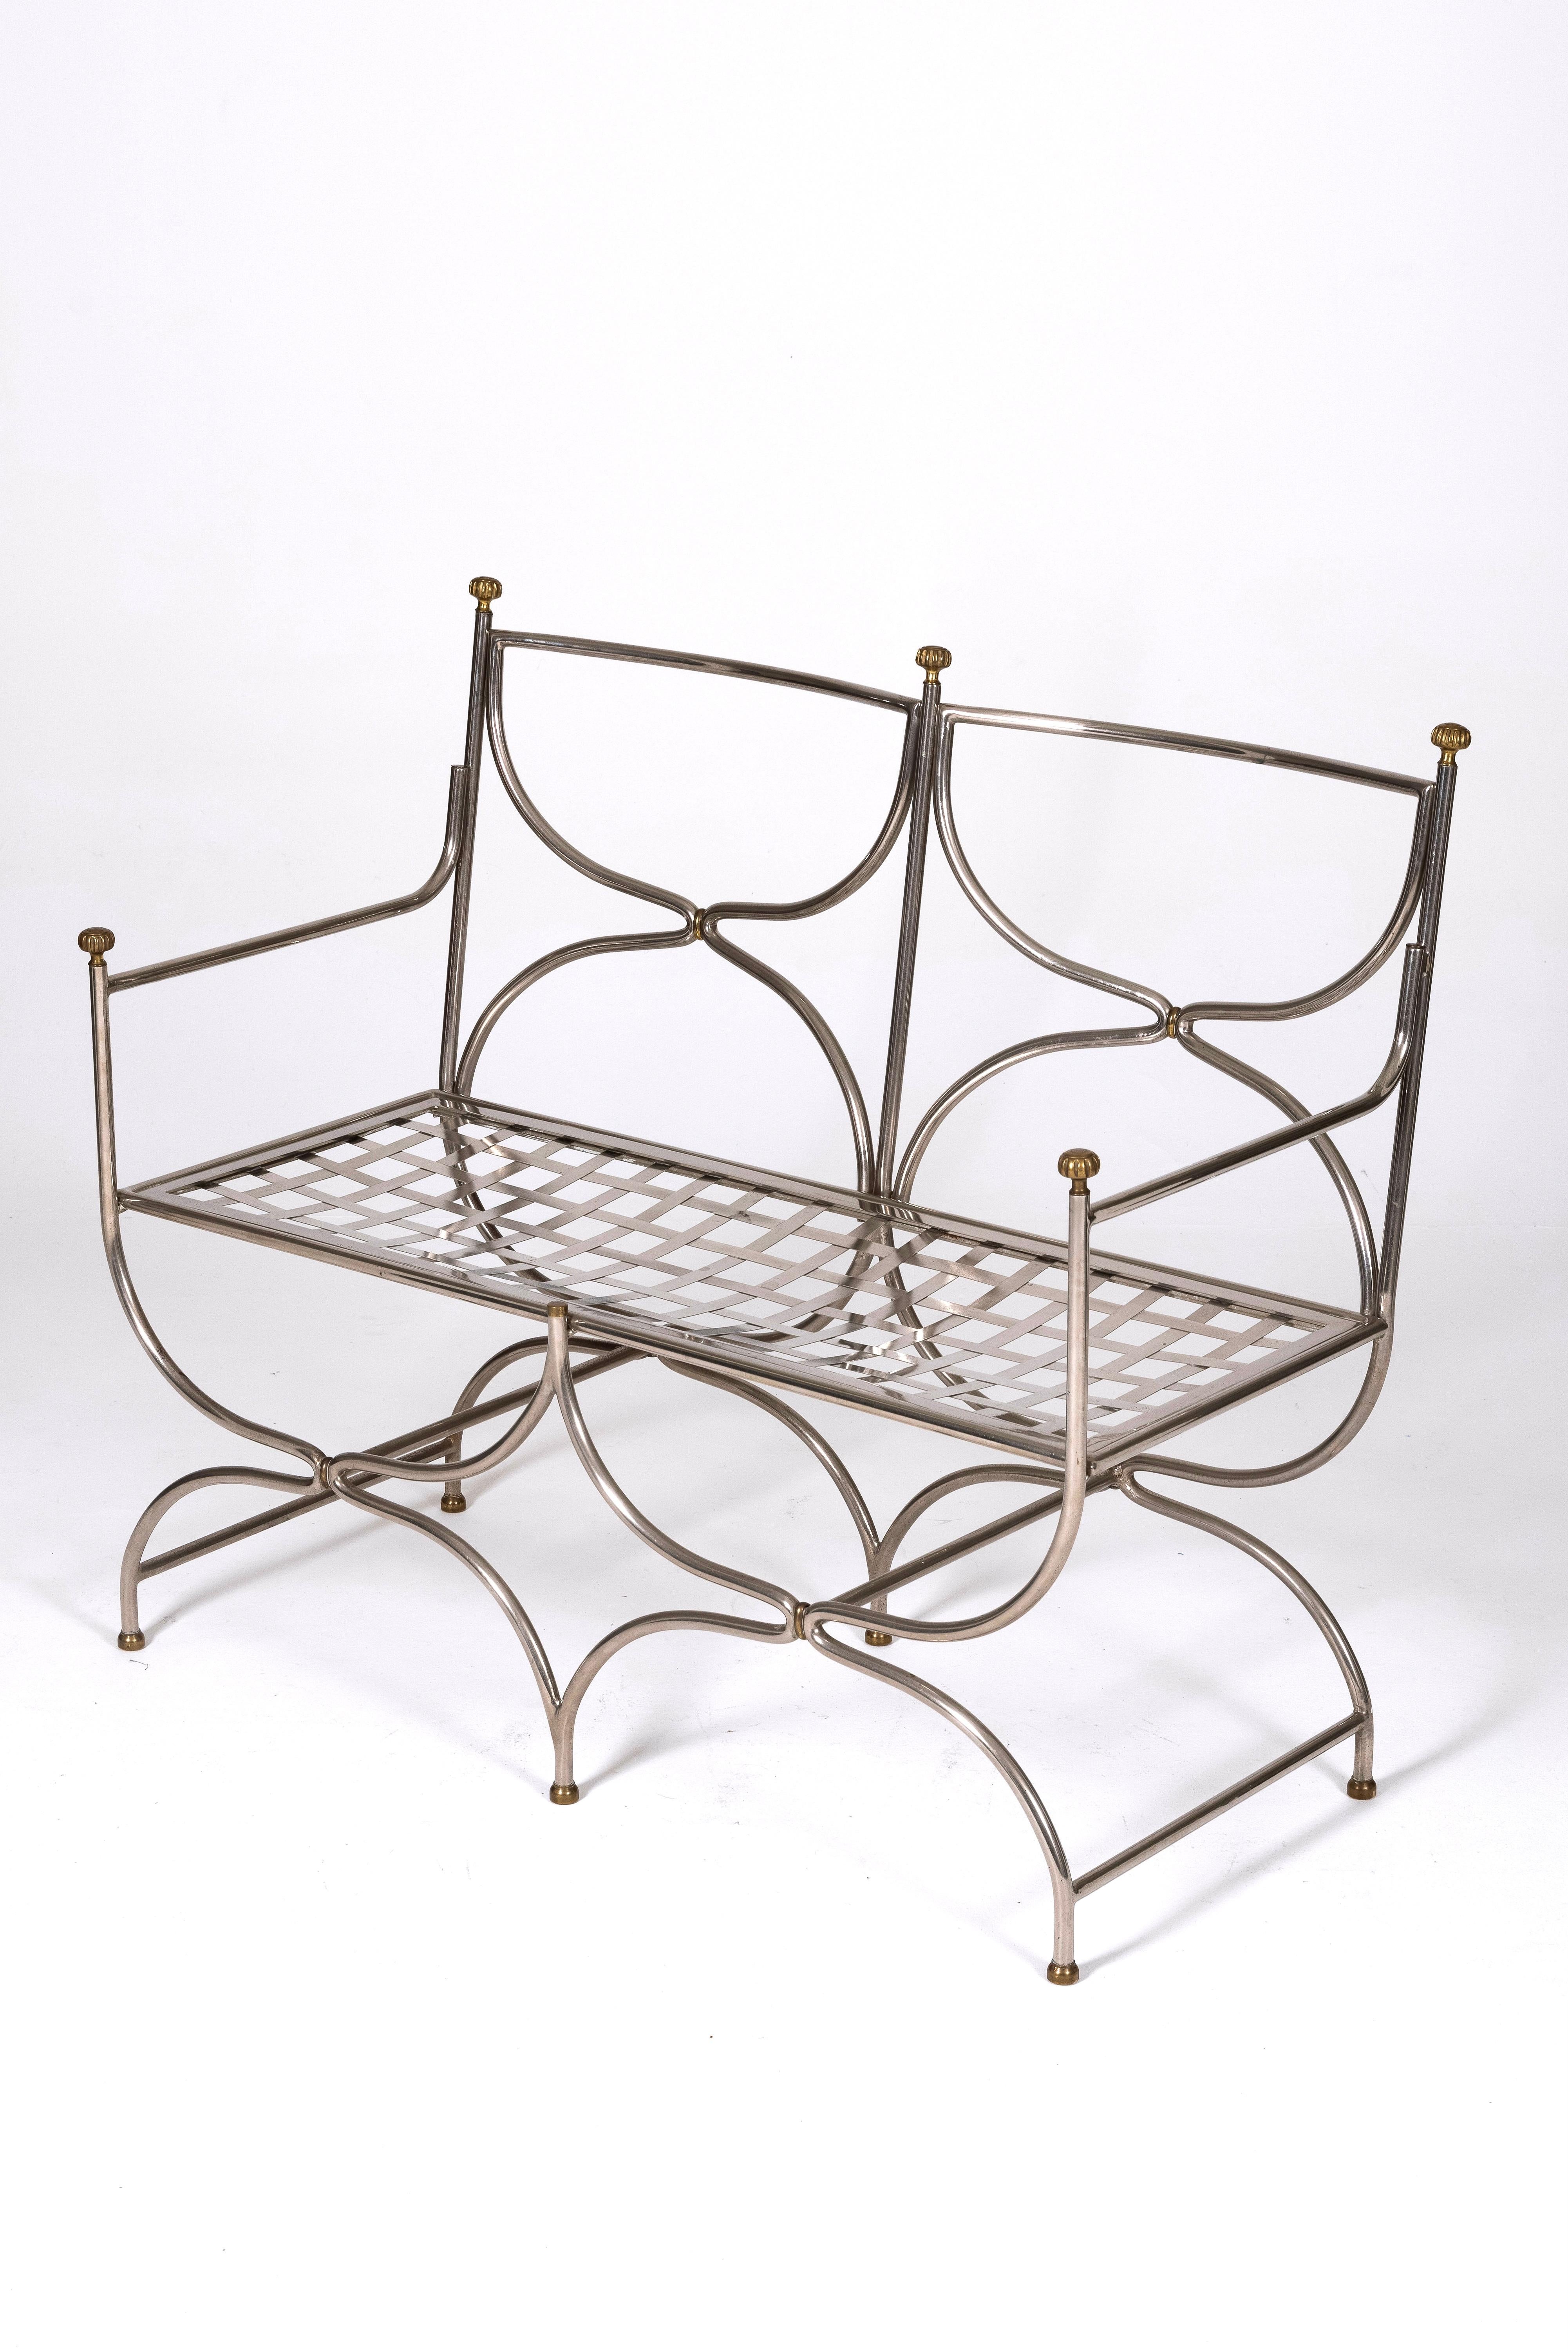 Steel and brass Curule Savonarola bench model by the designer and publisher Maison Jansen, from the 1960s. Two-seater bench with a steel grid seat and decorative brass elements. In excellent condition.
Lp1460.